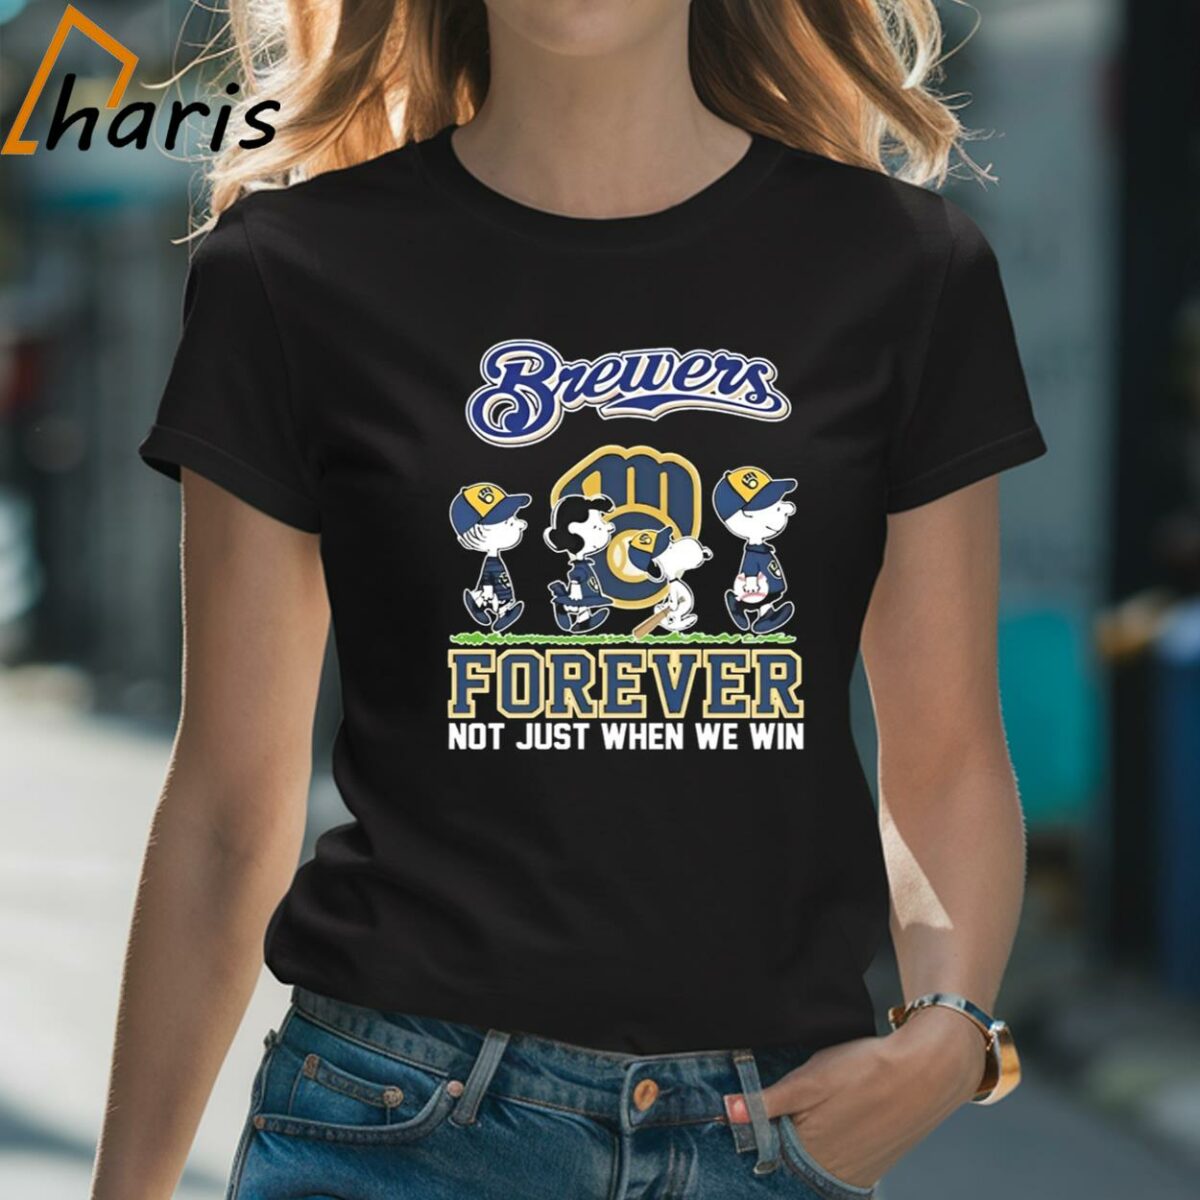 The Peanuts Movie Characters Milwaukee Brewers Abbey Road Forever Not Just When We Win Shirt 2 Shirt